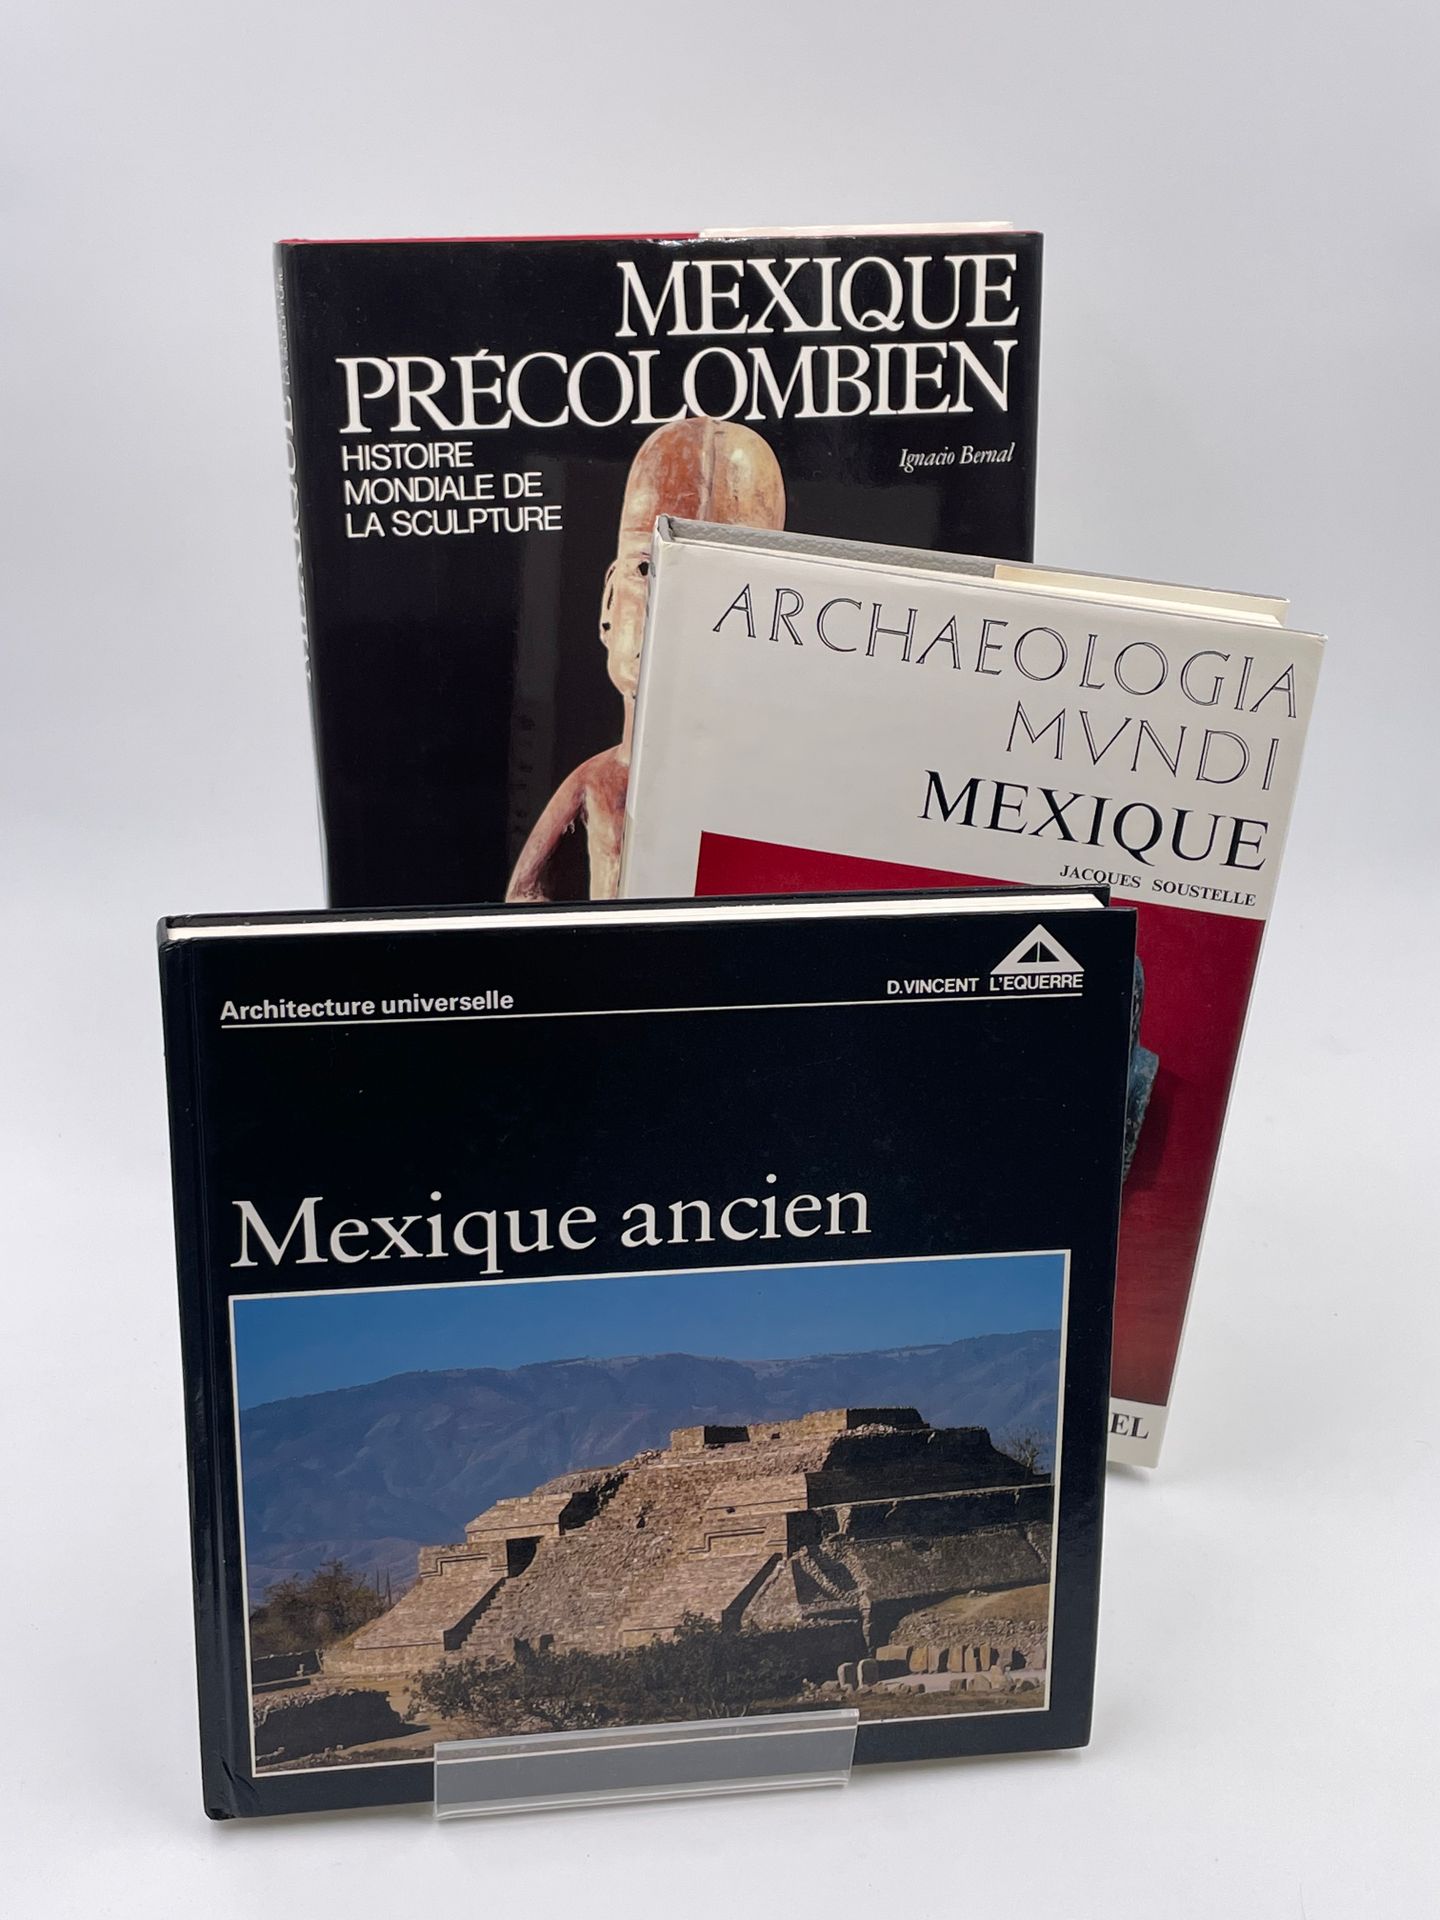 Null 3 Bände : 

- MEXICO" Jacques Soustelle, Archaeologia Mundi, Editions Nagel&hellip;